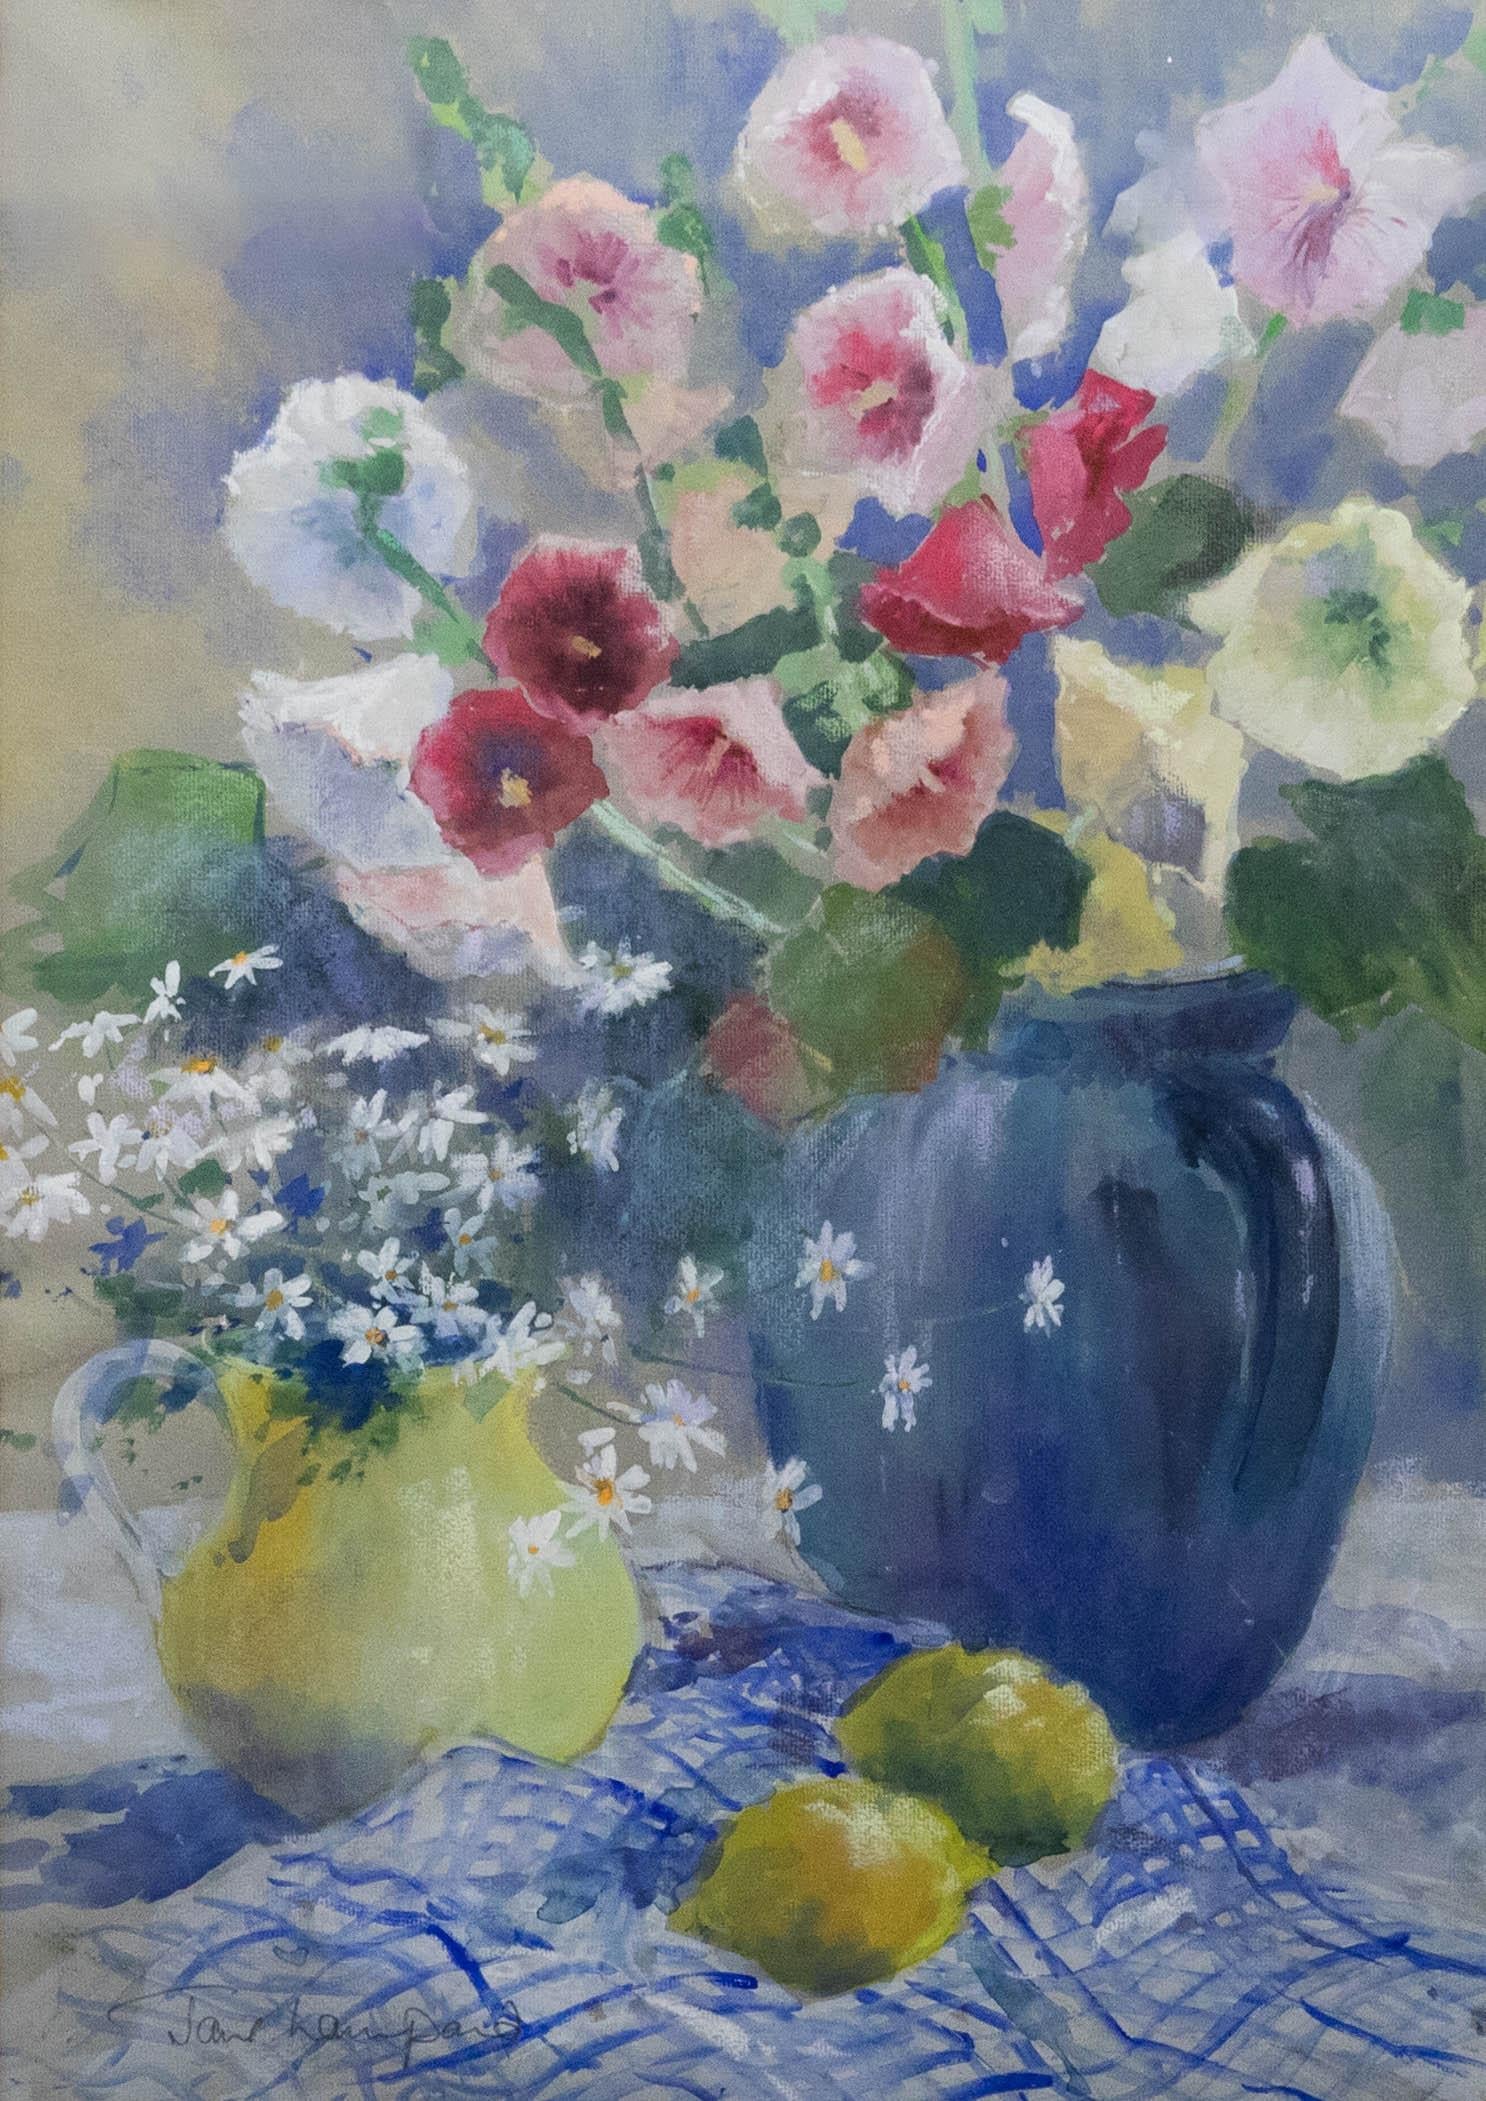 A colourful study of hollyhocks and daisies, placed alongside two lemons on gingham. Well presented in a large wooden frame with double card mount. Signed in graphite to the lower left. On paper. 